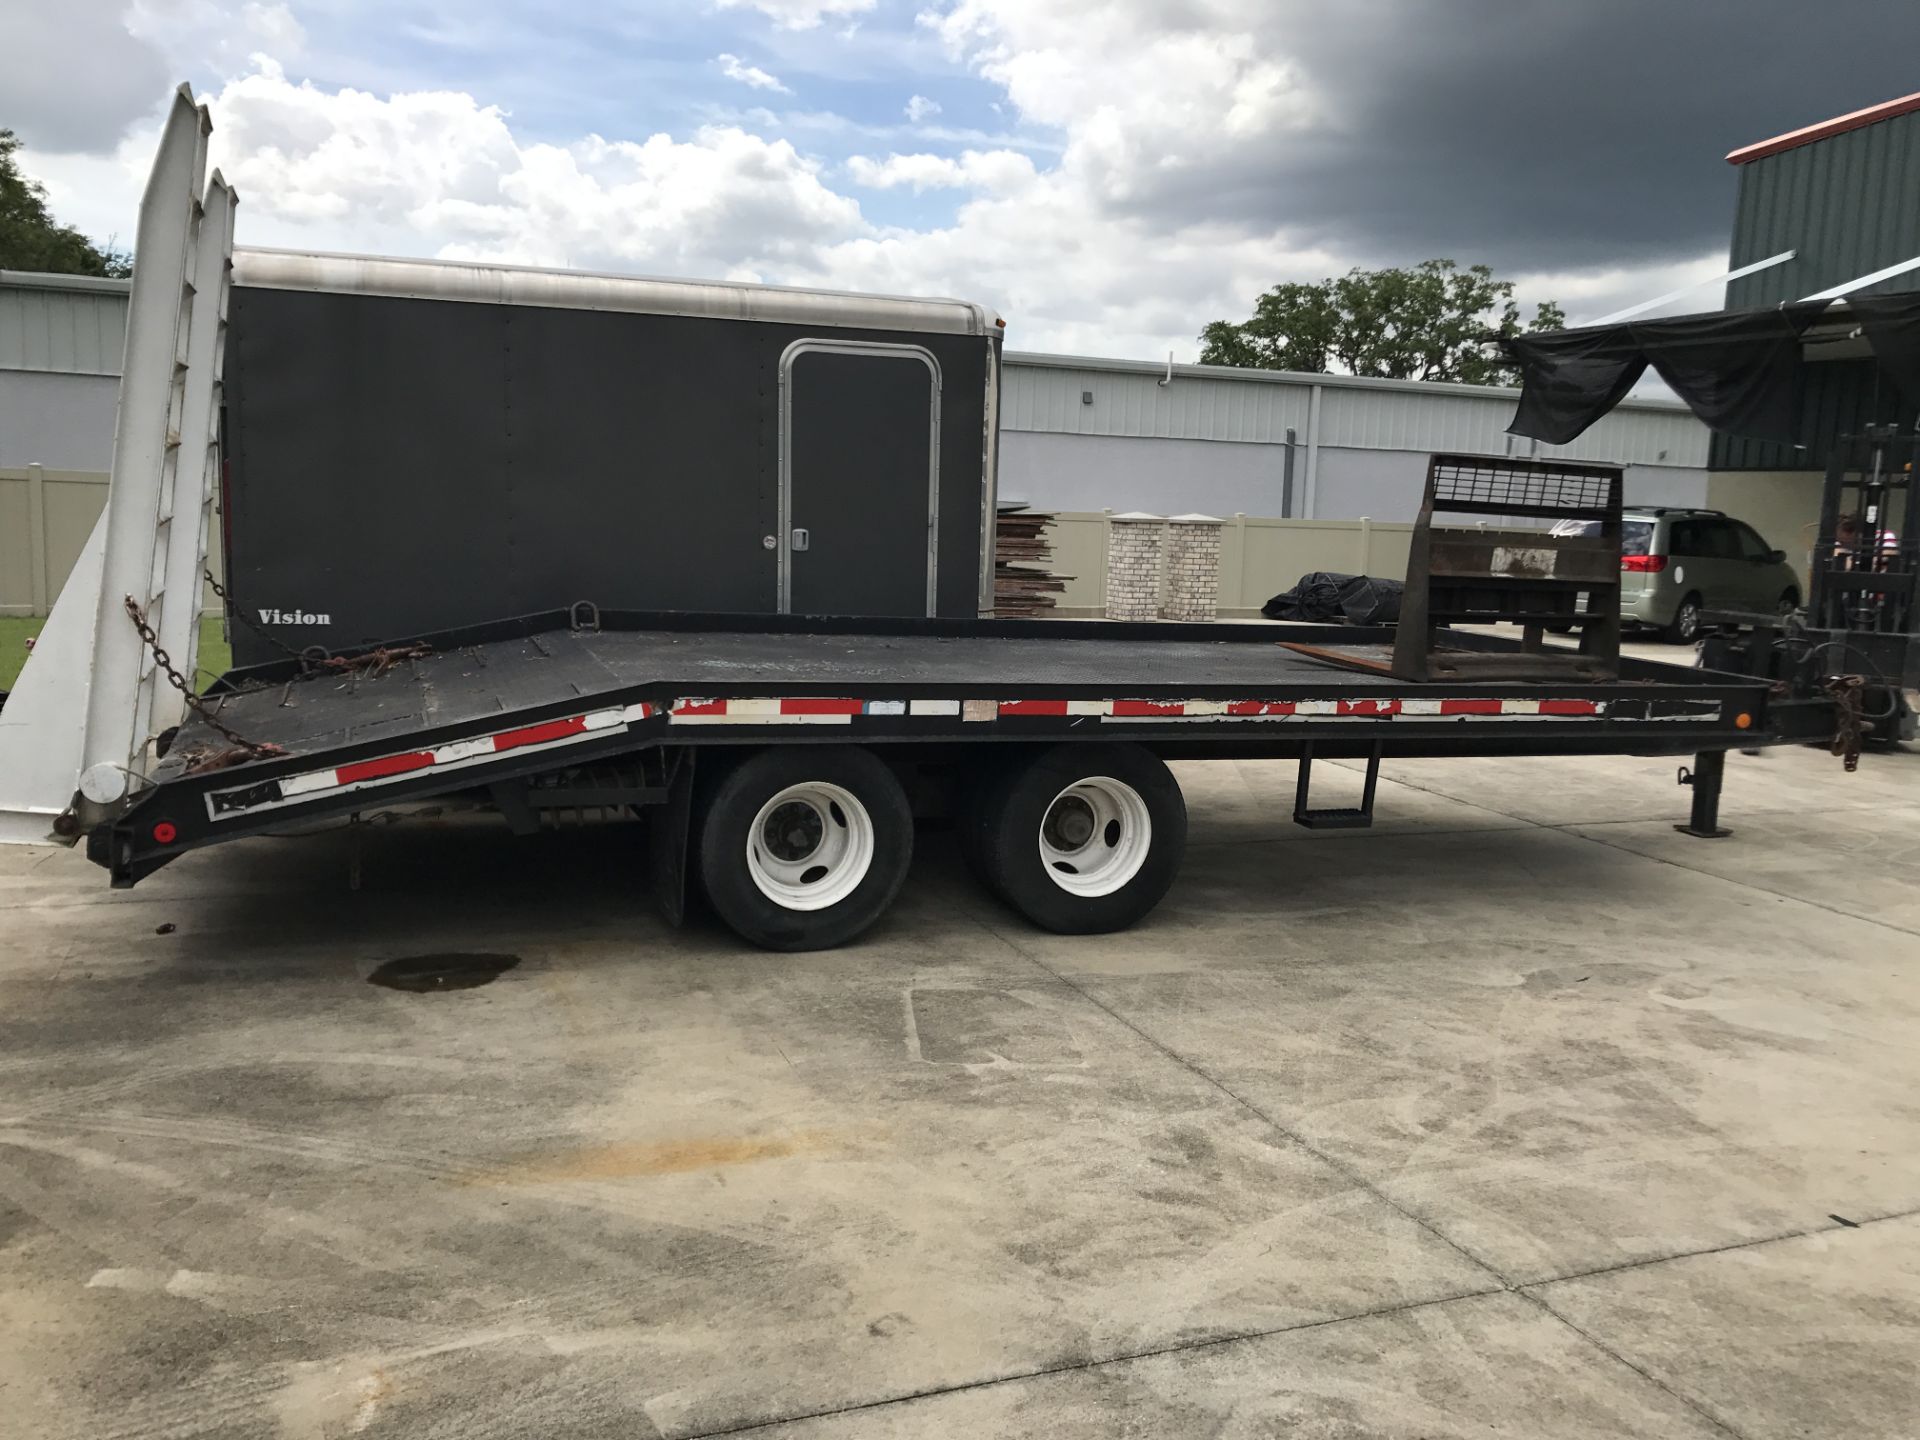 20' EQUIPMENT TRAILER W/ 5' FOLD DOWN RAMPS, 20' STEEL DECK, AIR BRAKES - Image 2 of 4